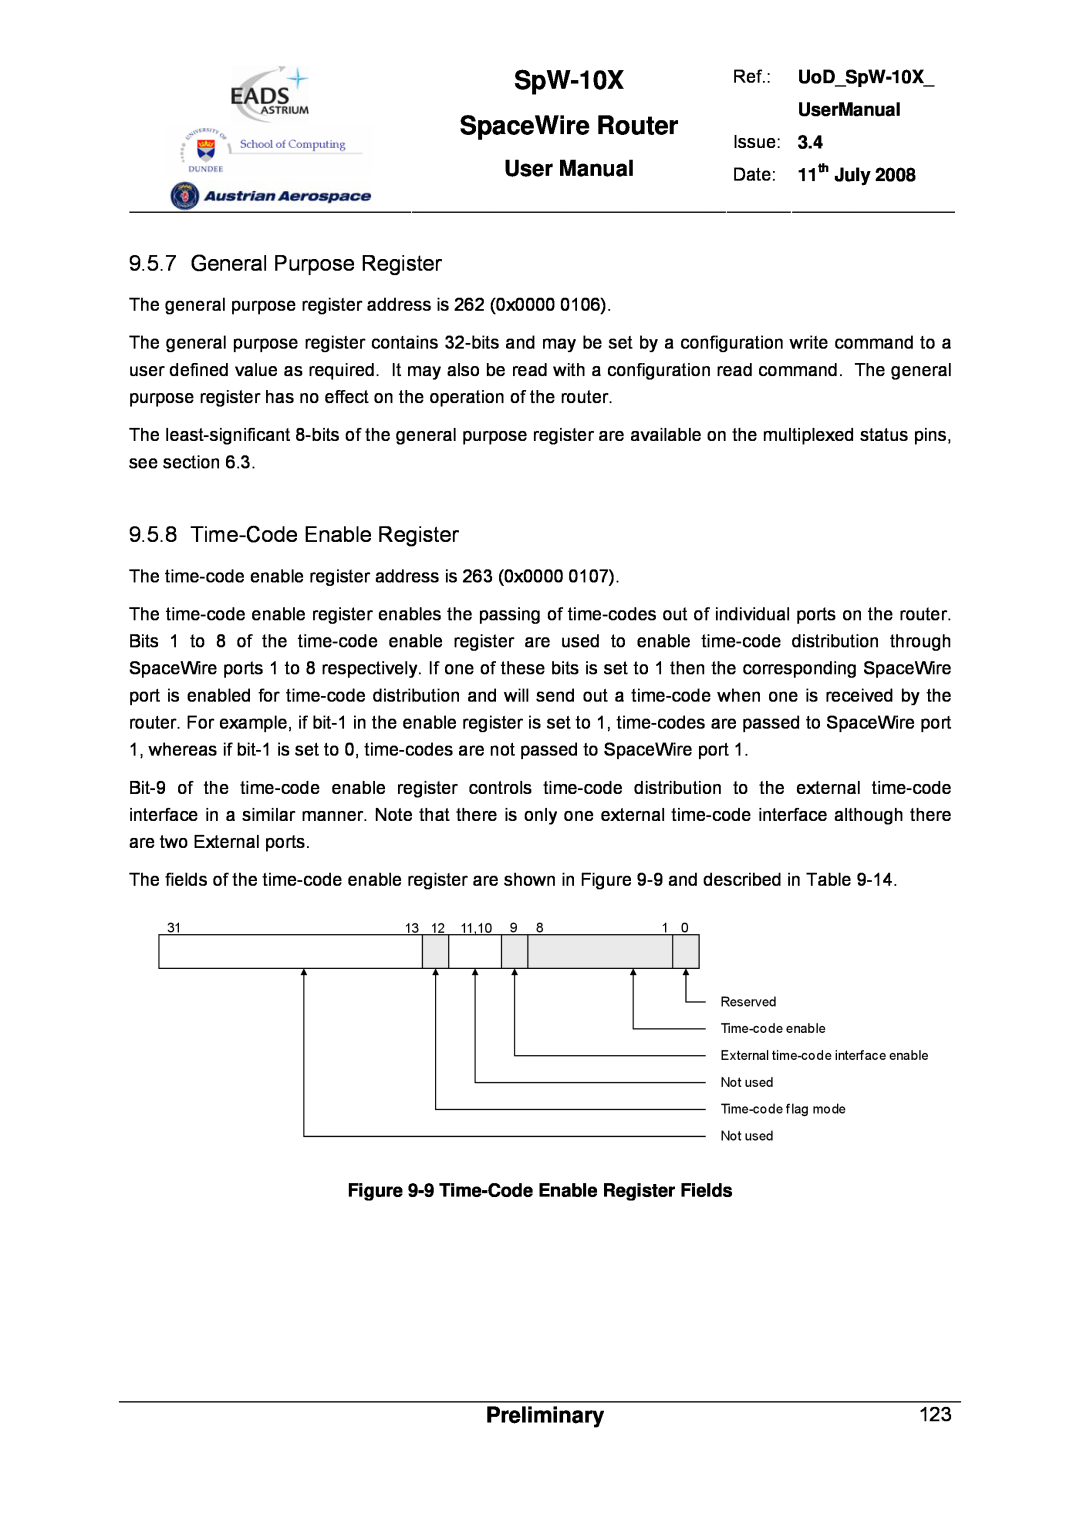 Atmel SpW-10X user manual General Purpose Register, Time-Code Enable Register, SpaceWire Router, User Manual, Preliminary 